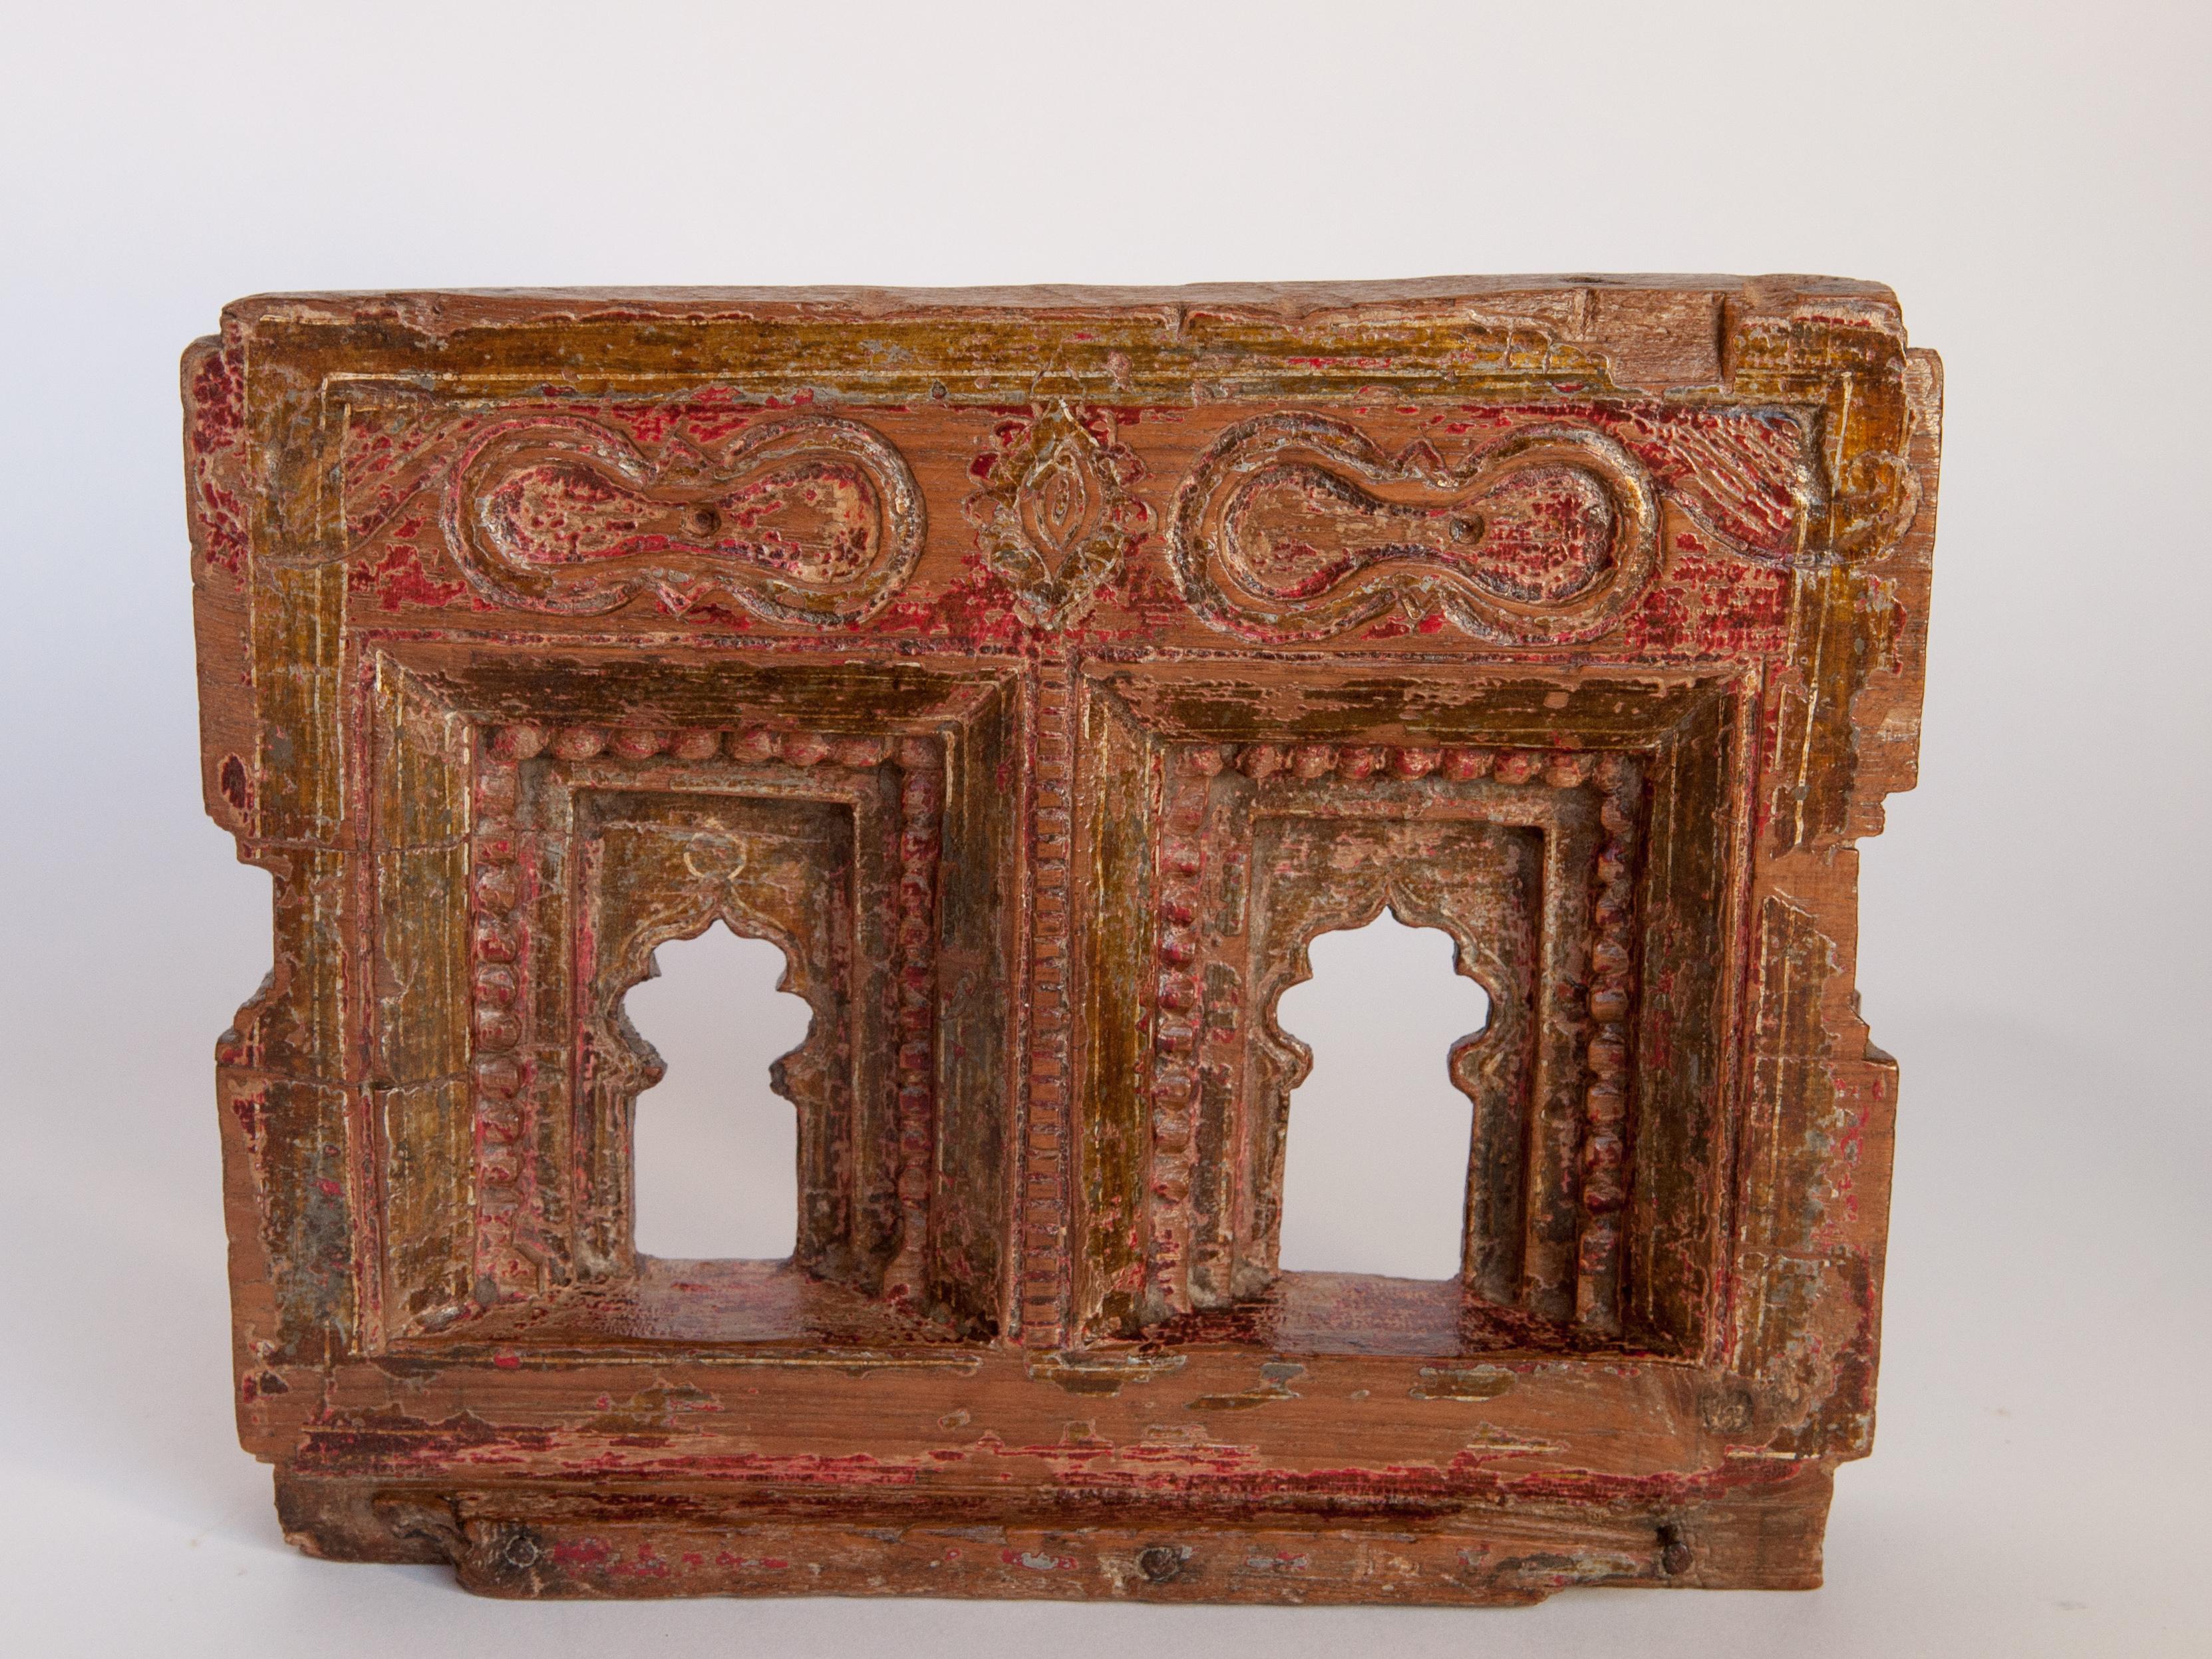 Vintage architectural votive miniature or picture frame, hand carved of wood, with traces of original color, mid-20th century, India. Measures: 9.5 wide x 7.5 high.
This vintage hand carved wooden frame, from South India, is basically a miniature